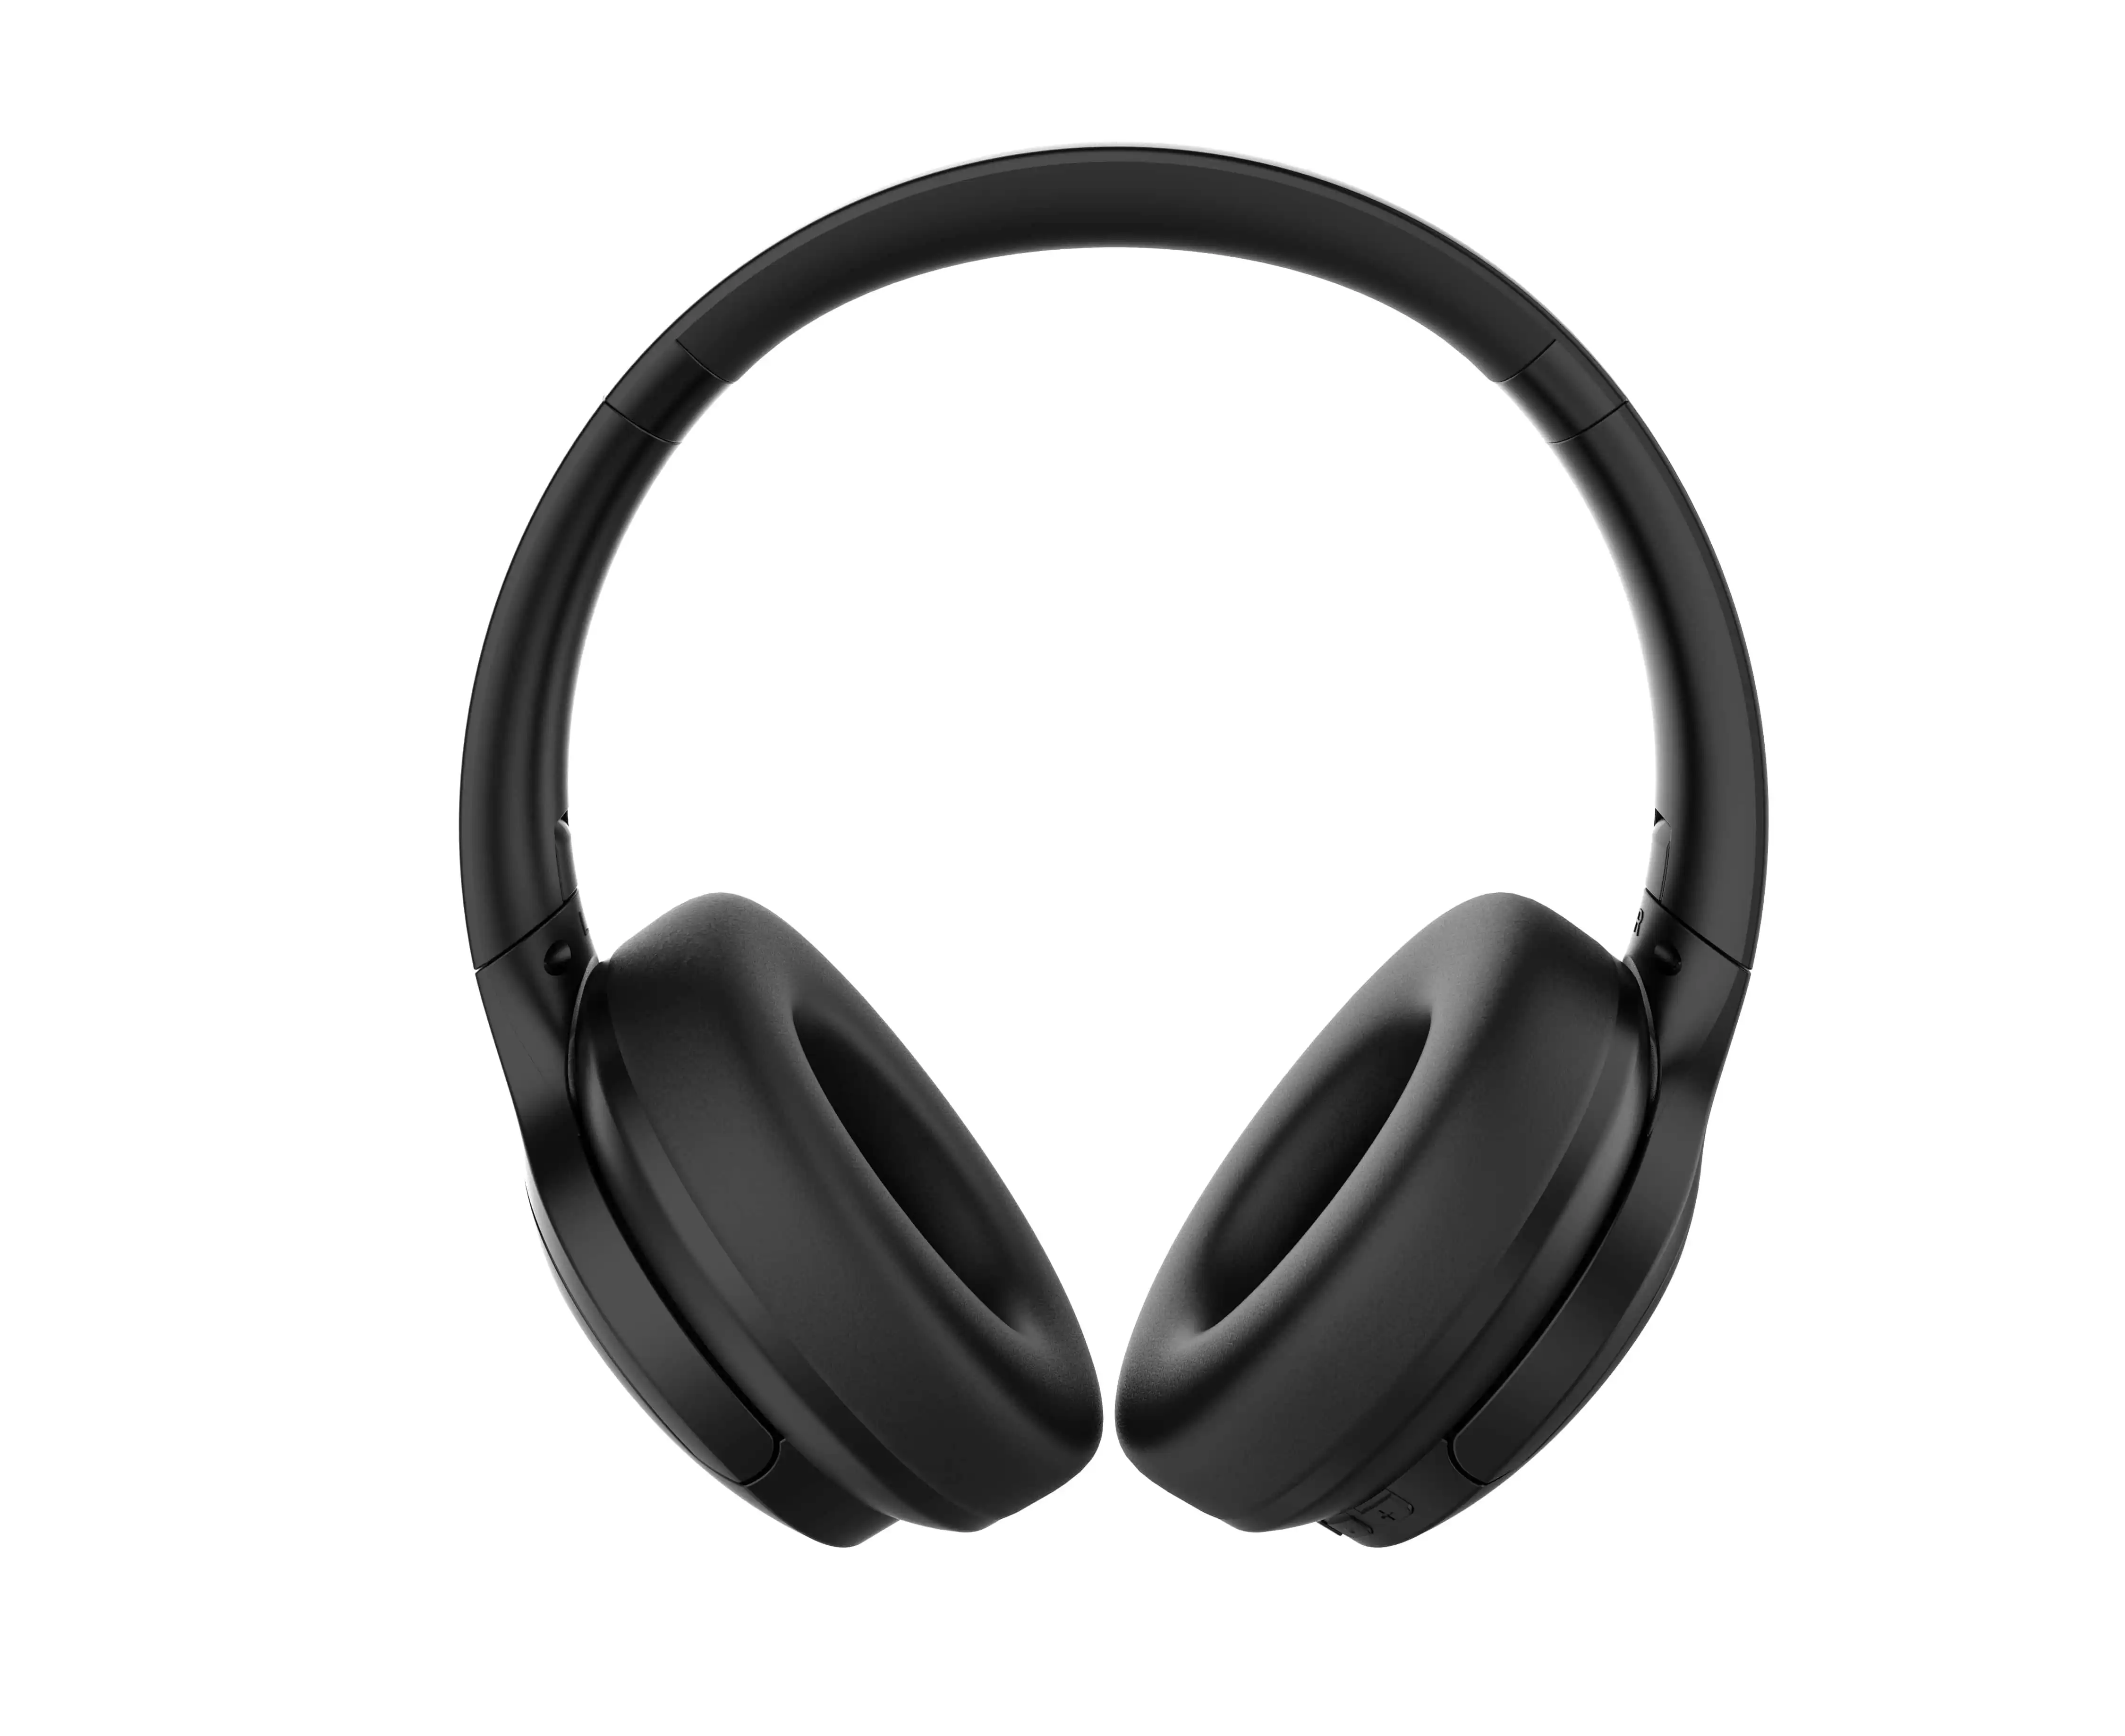 Laser ANC Bluetooth Headphones with 20hr Battery - Black